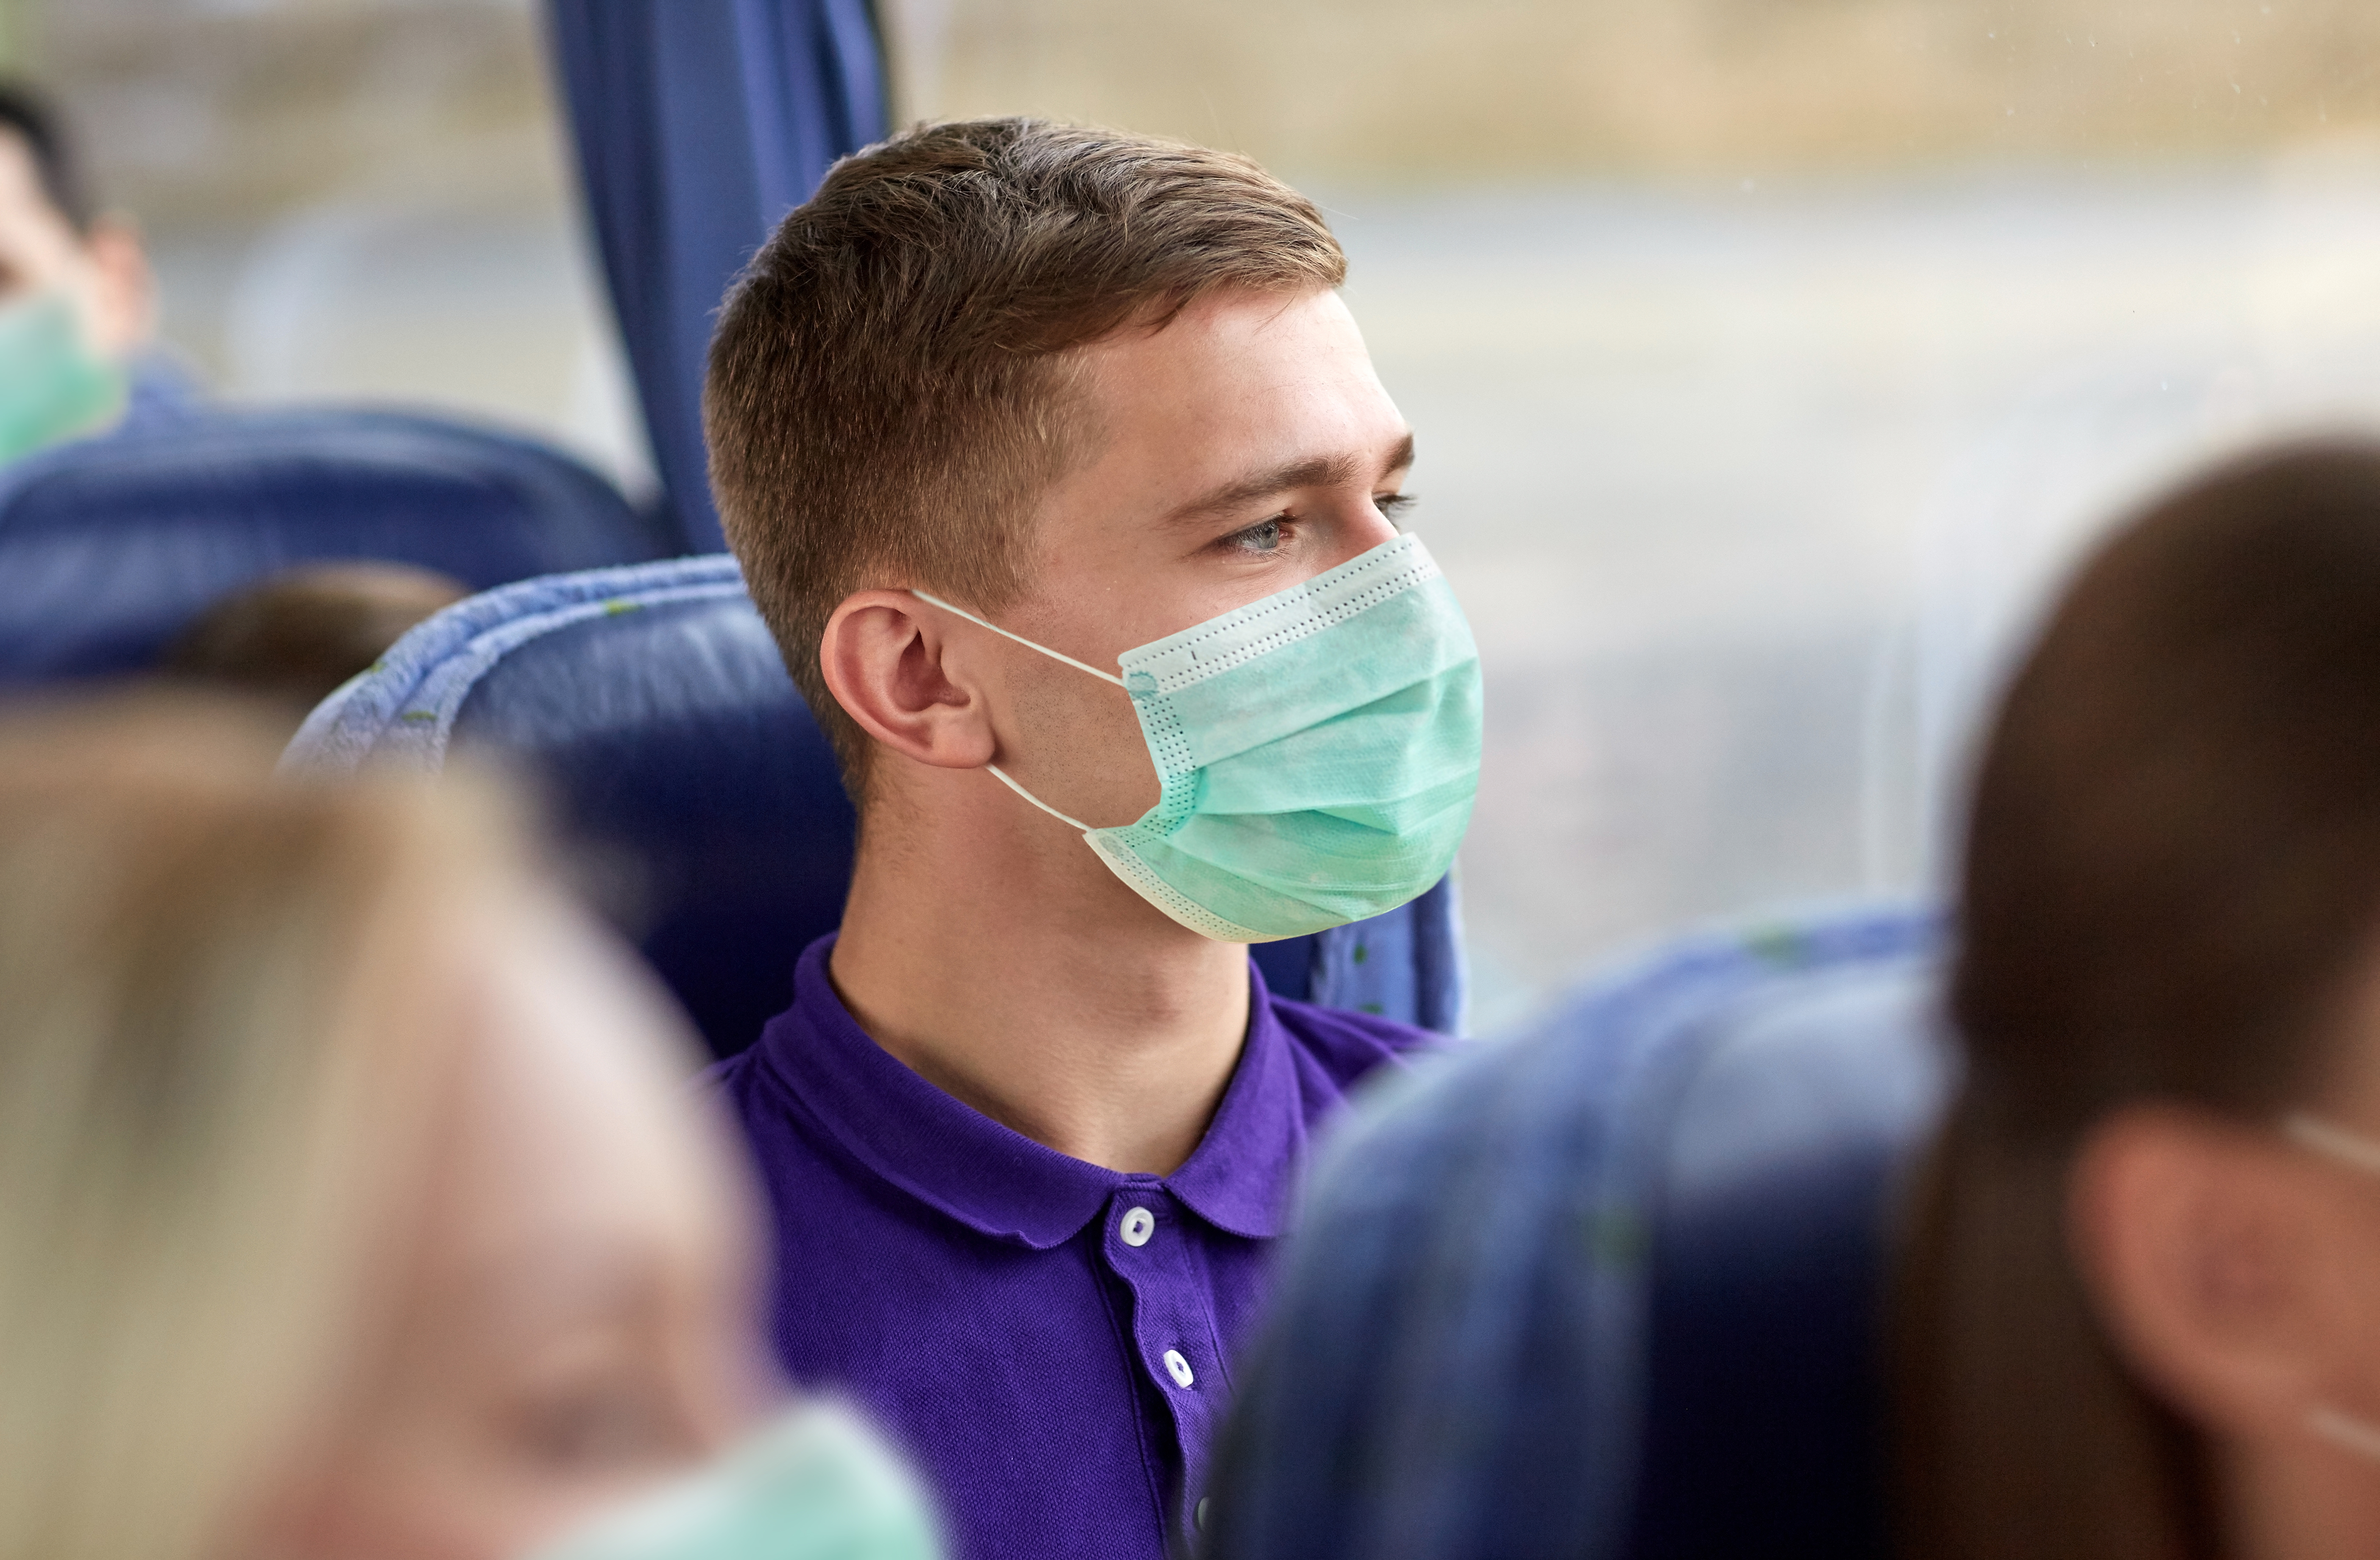 Young man on a bus wearing a face mask